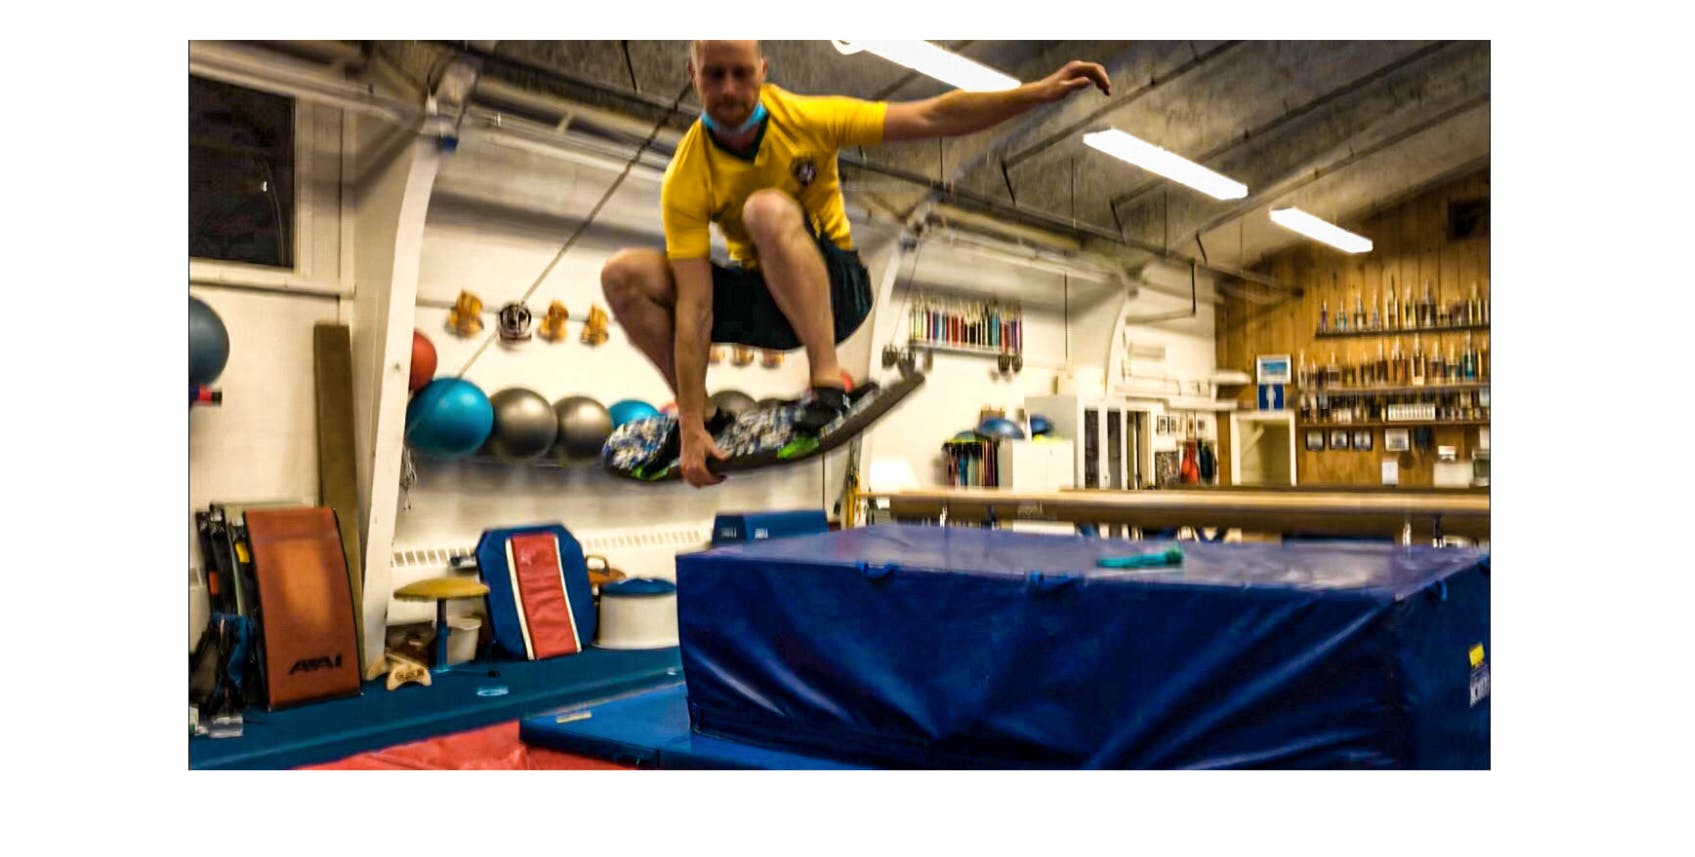 A man does an indy grab on a trampoline.